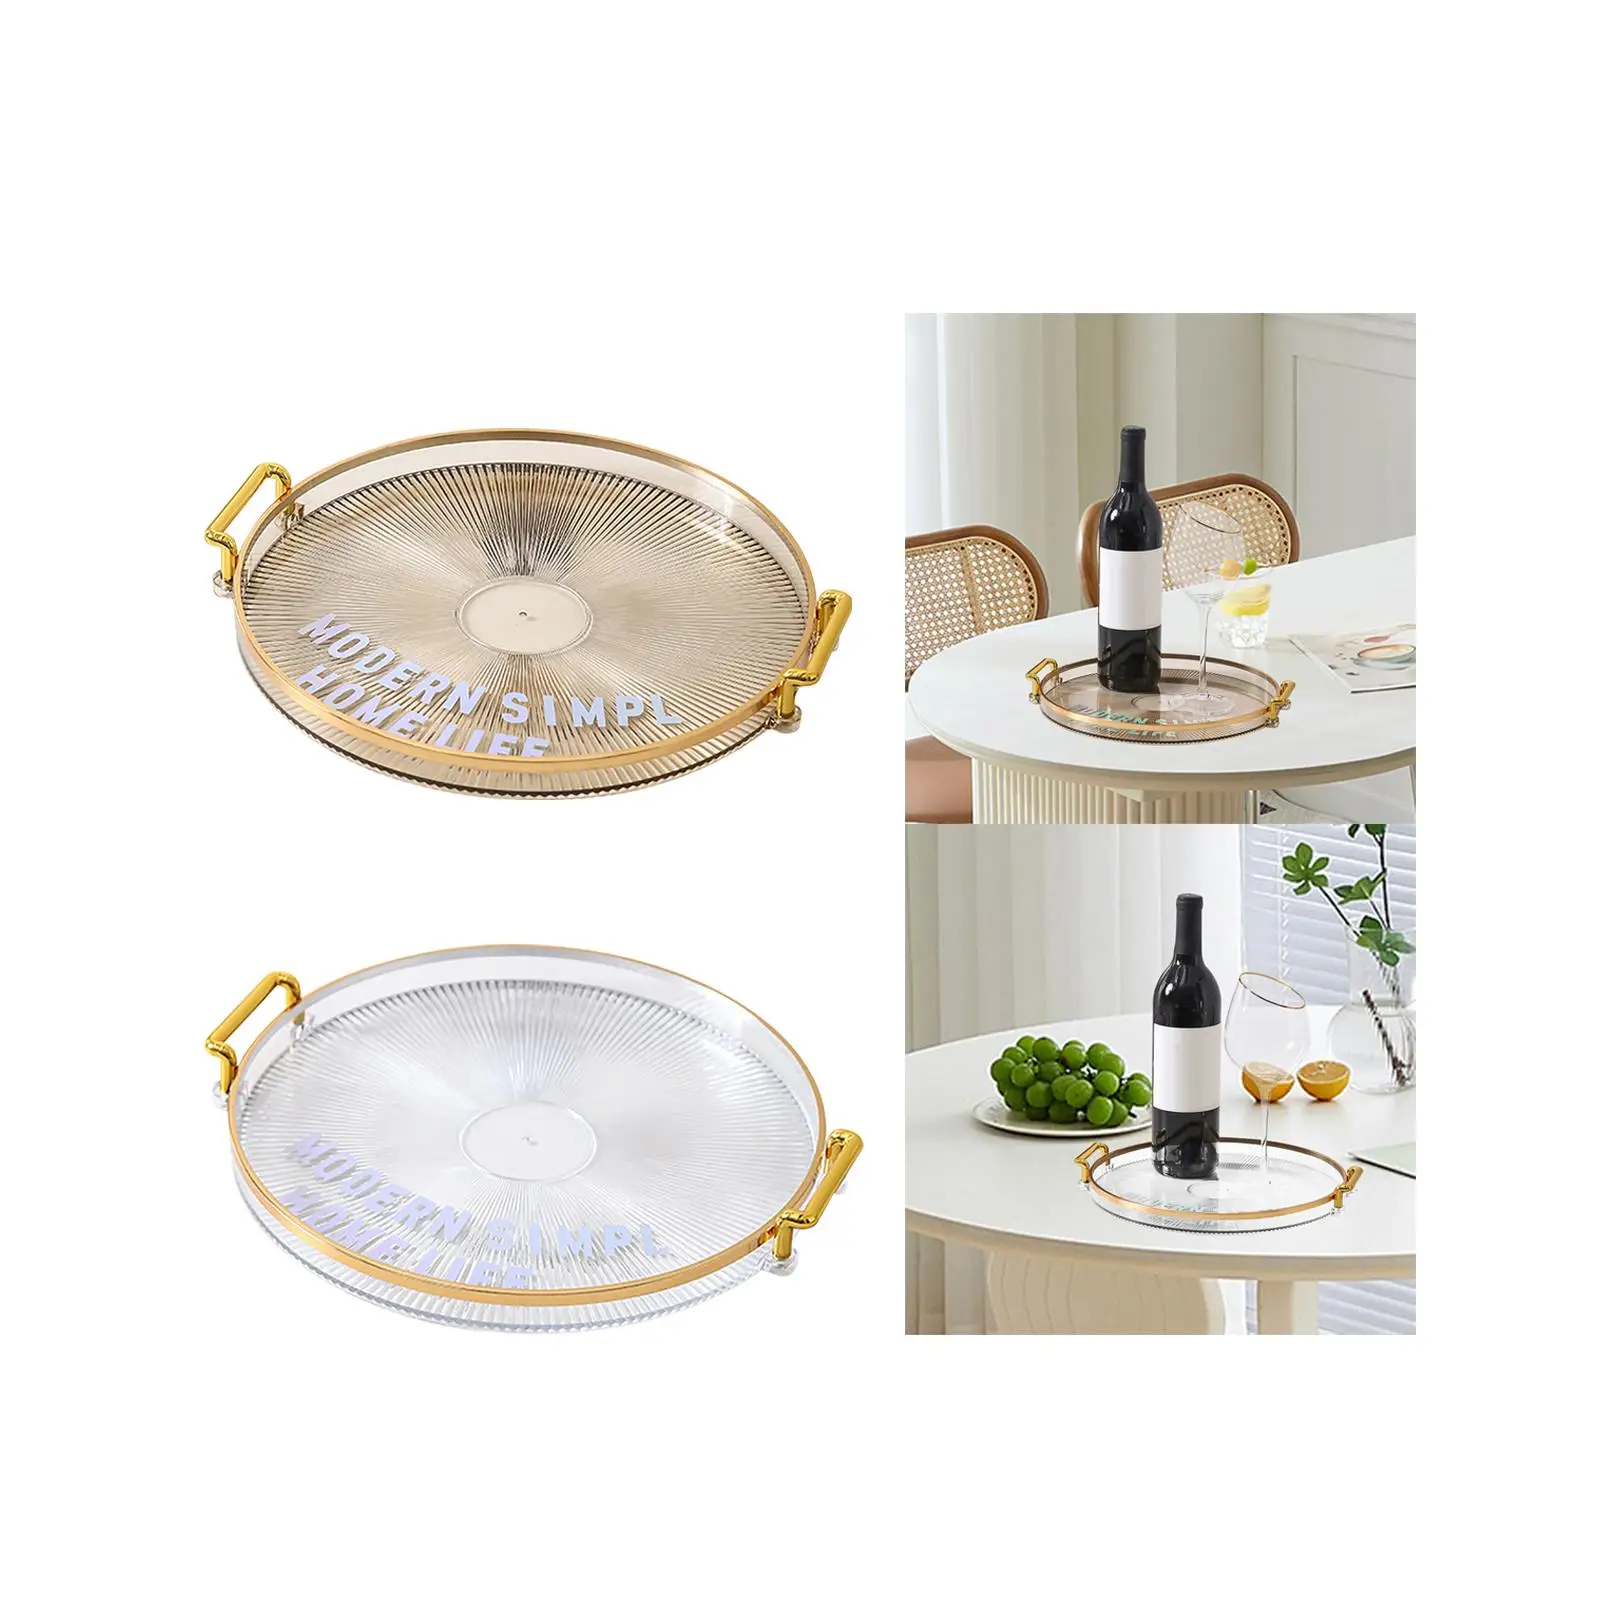 Multifunction Serving Tray with Handles Party Serving Platter Cake Stand for Pantry Table Centerpiece Dining Table Bathroom Home